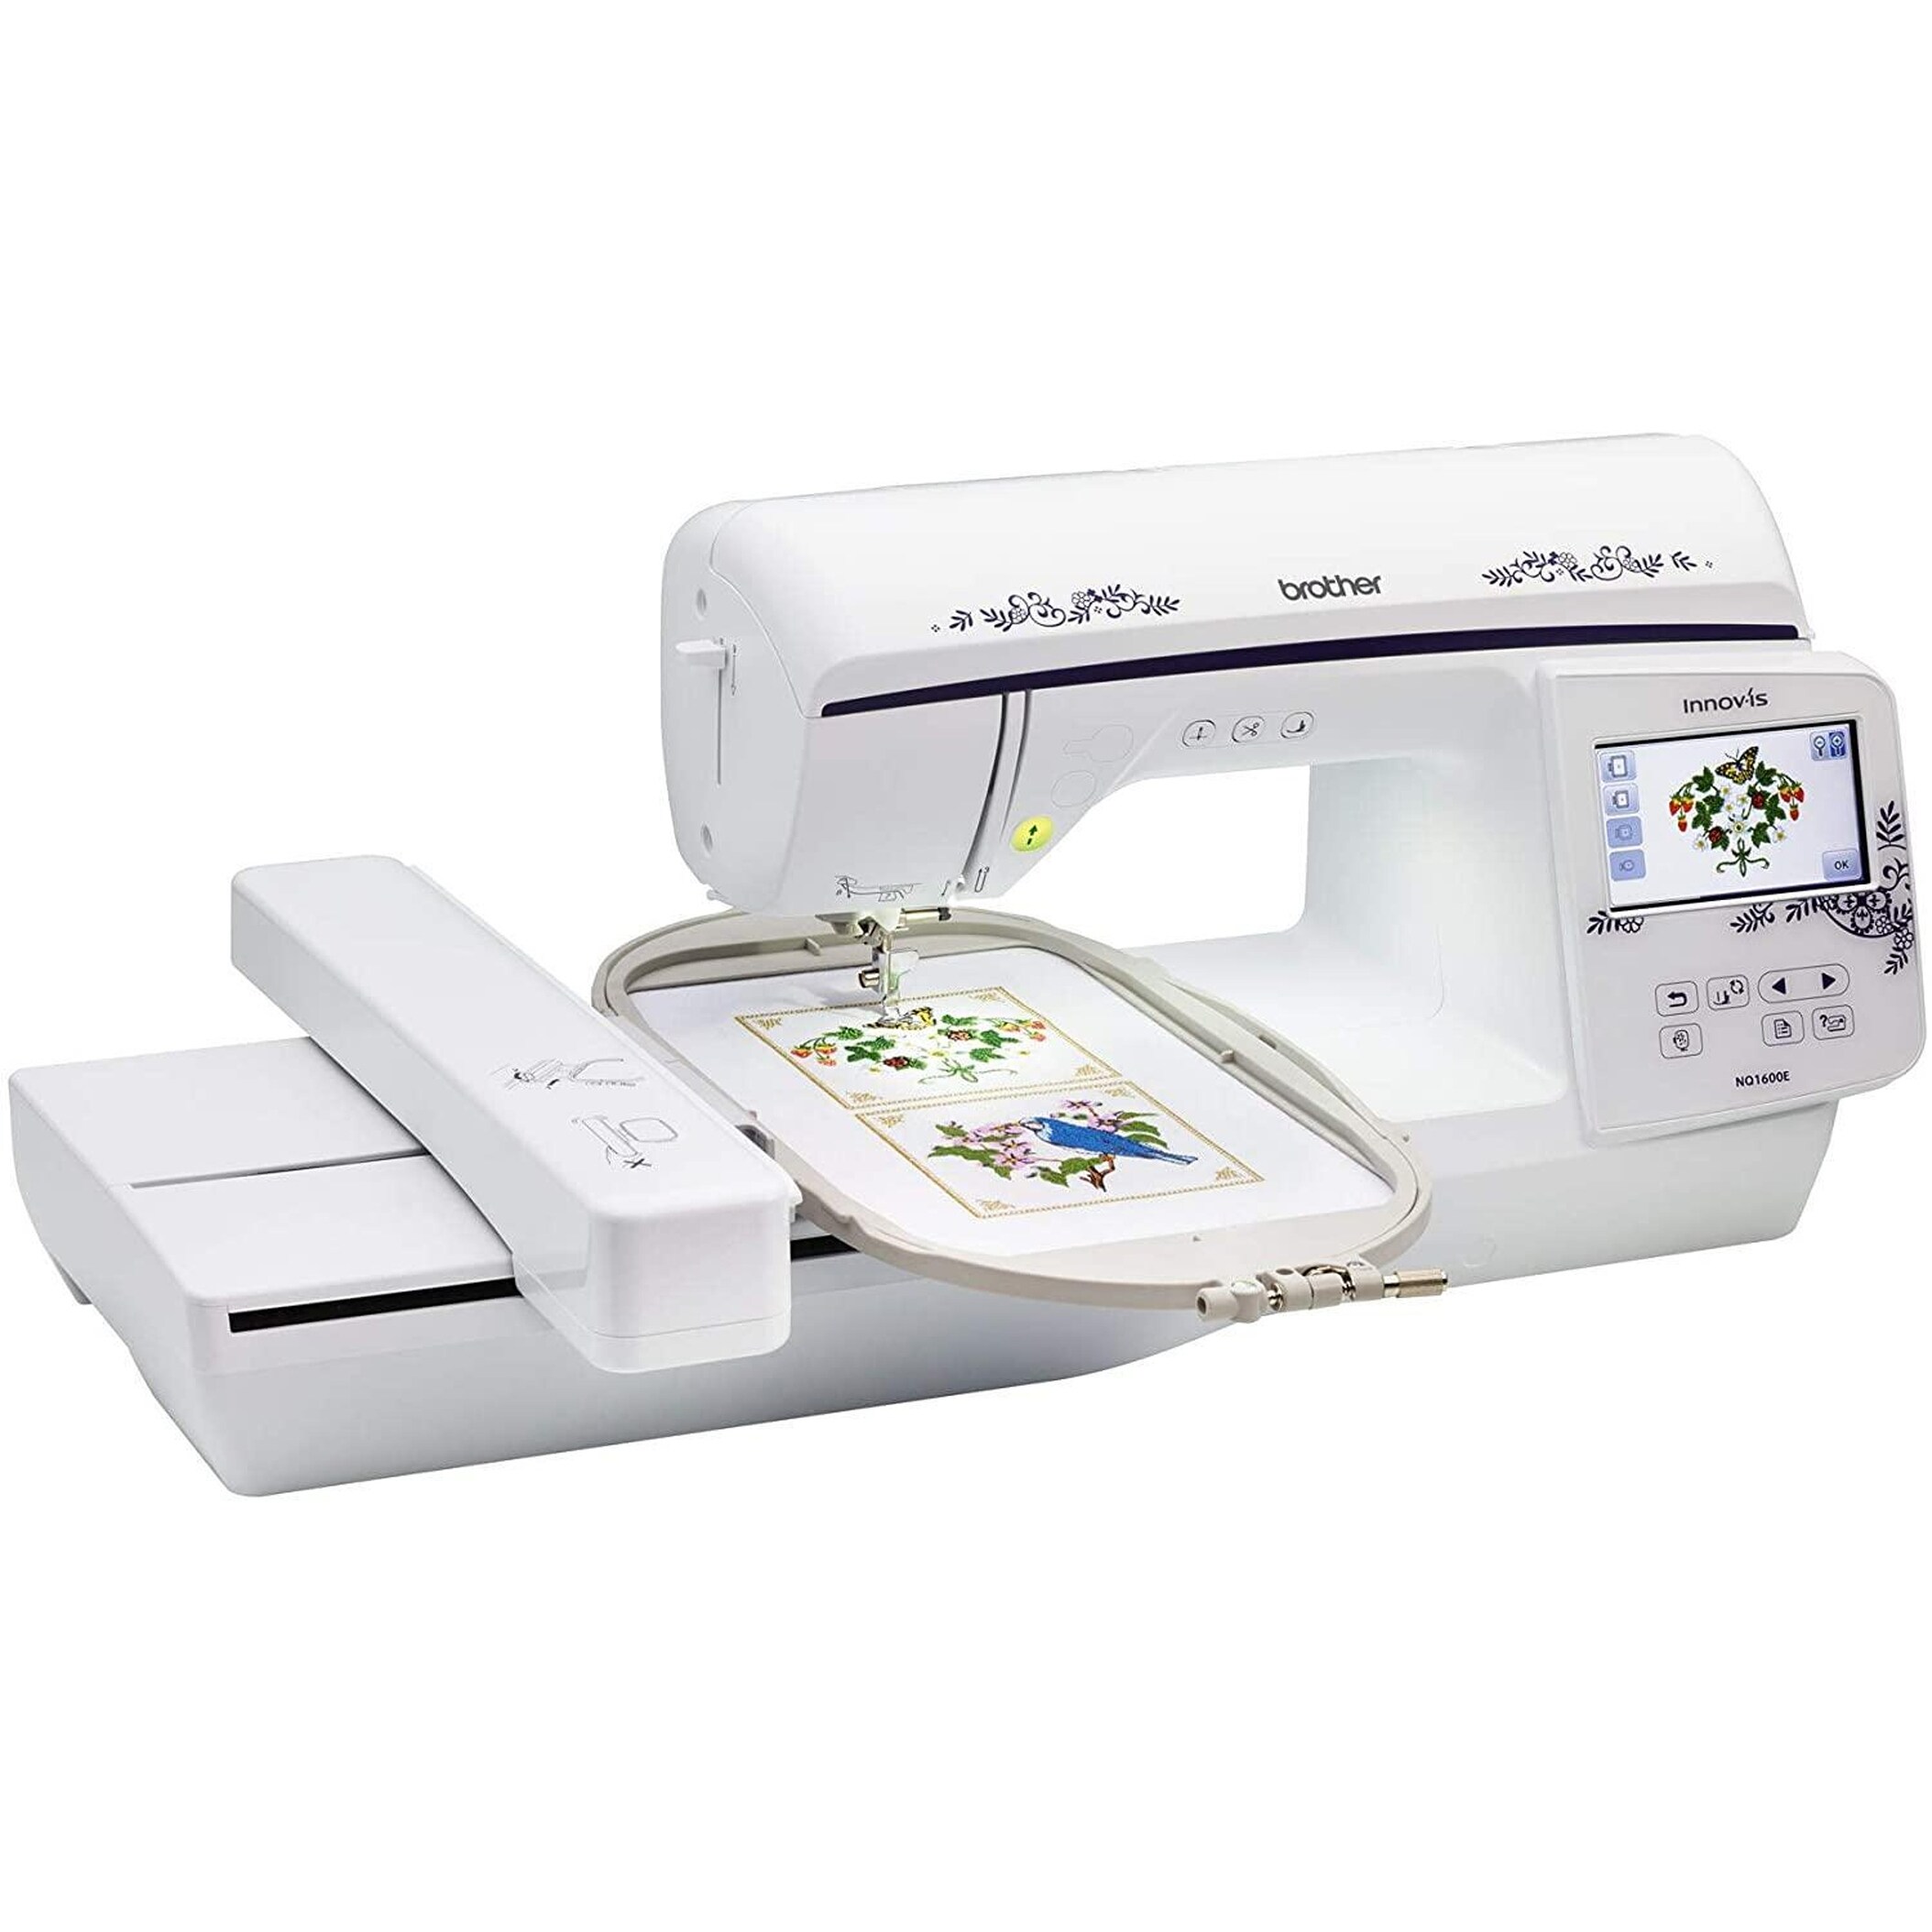 Brother Elite PE900 Large Embroidery Machine with Wireless LAN